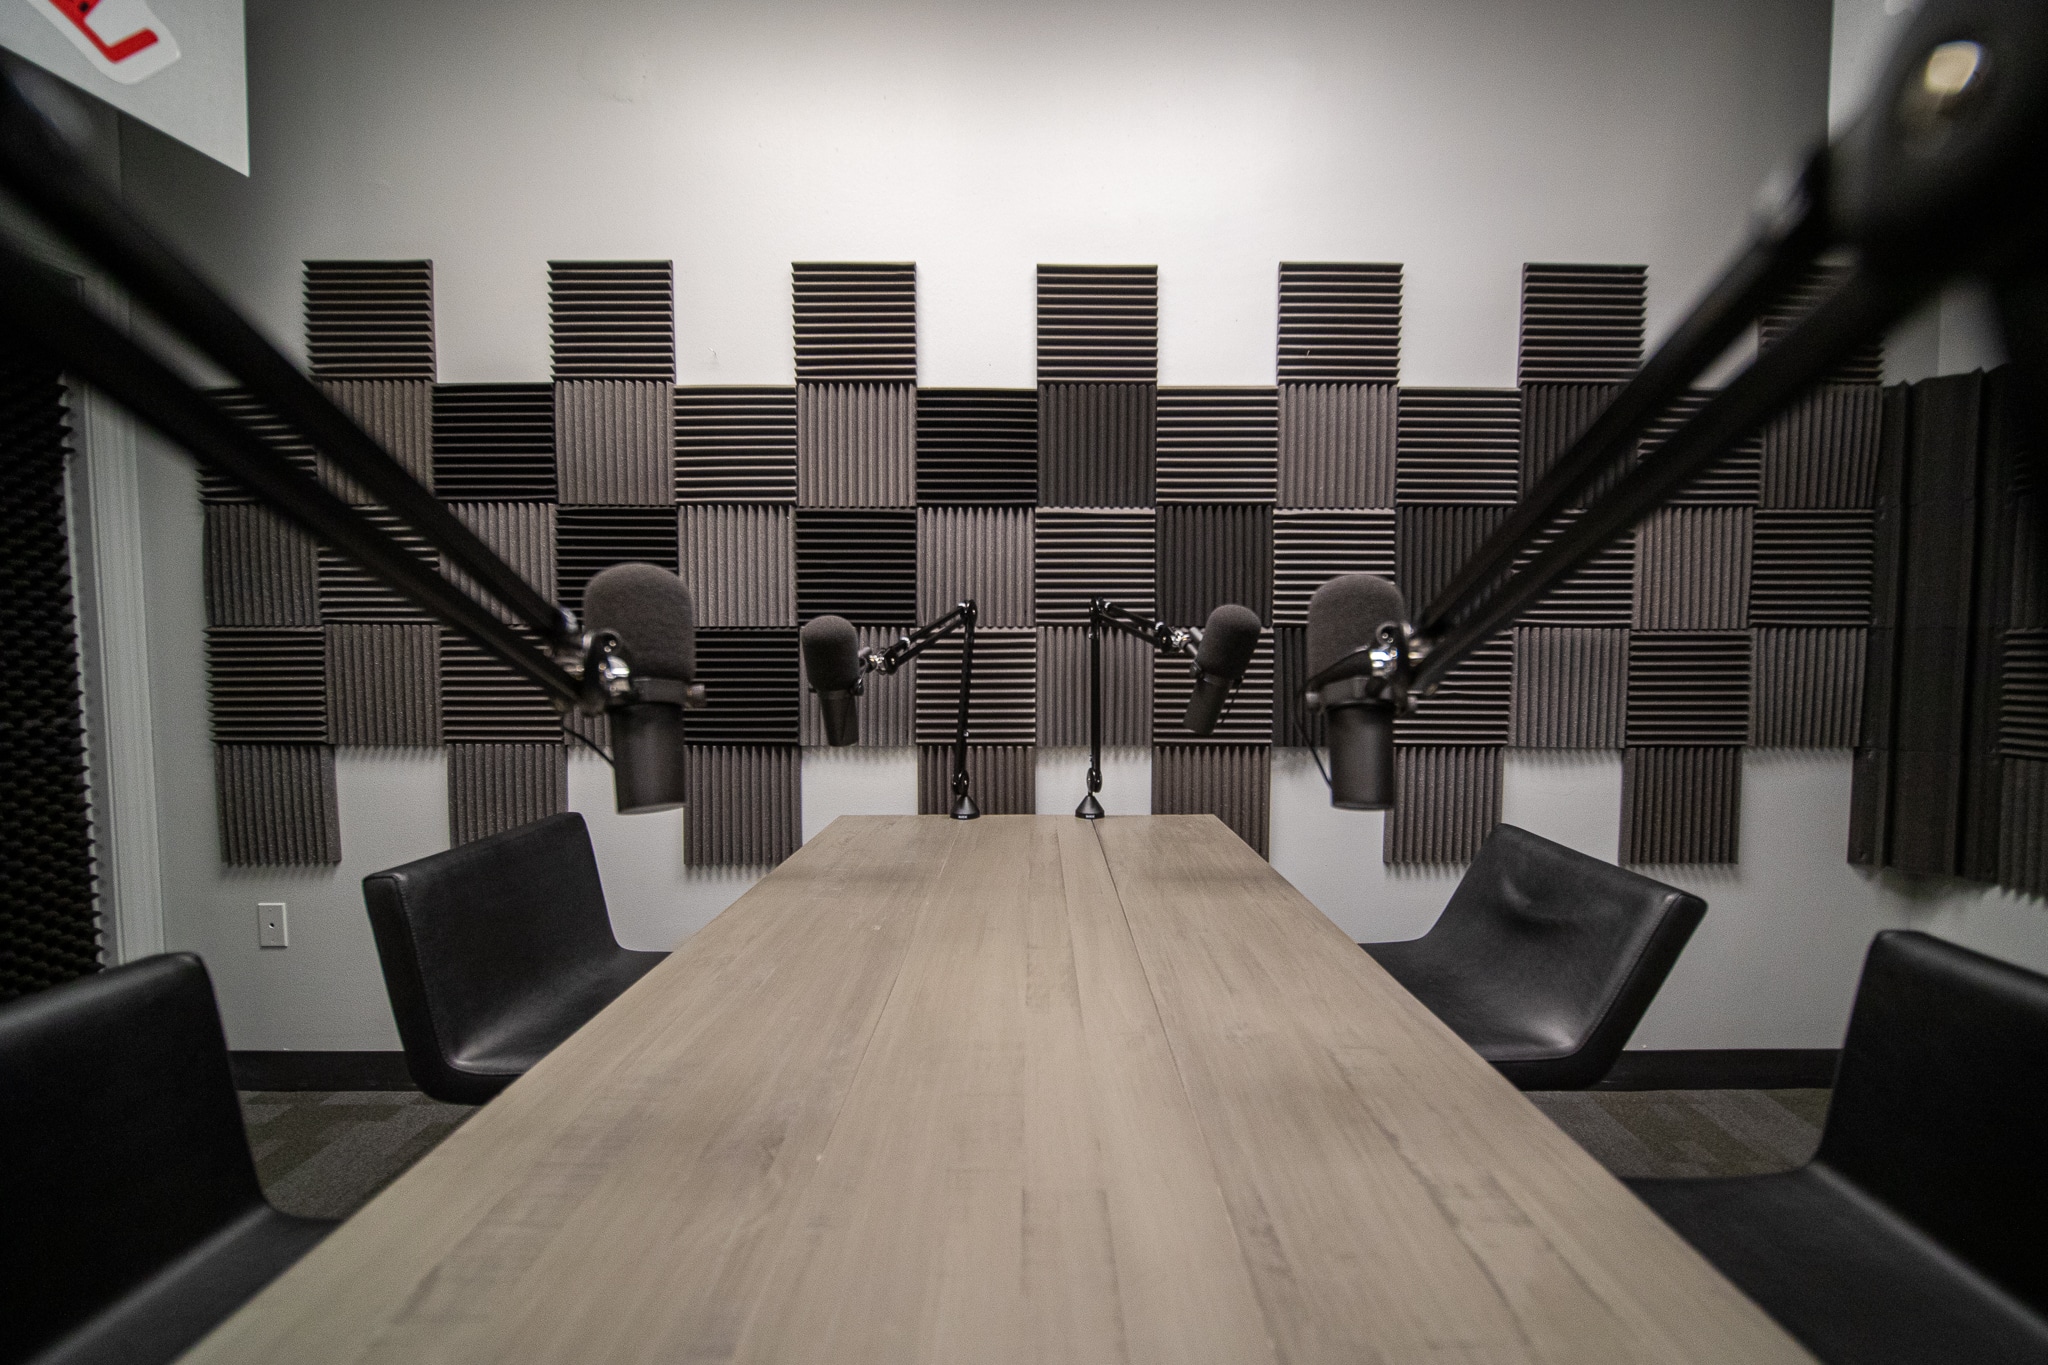 The table and four chairs inside a podcast recording studio.